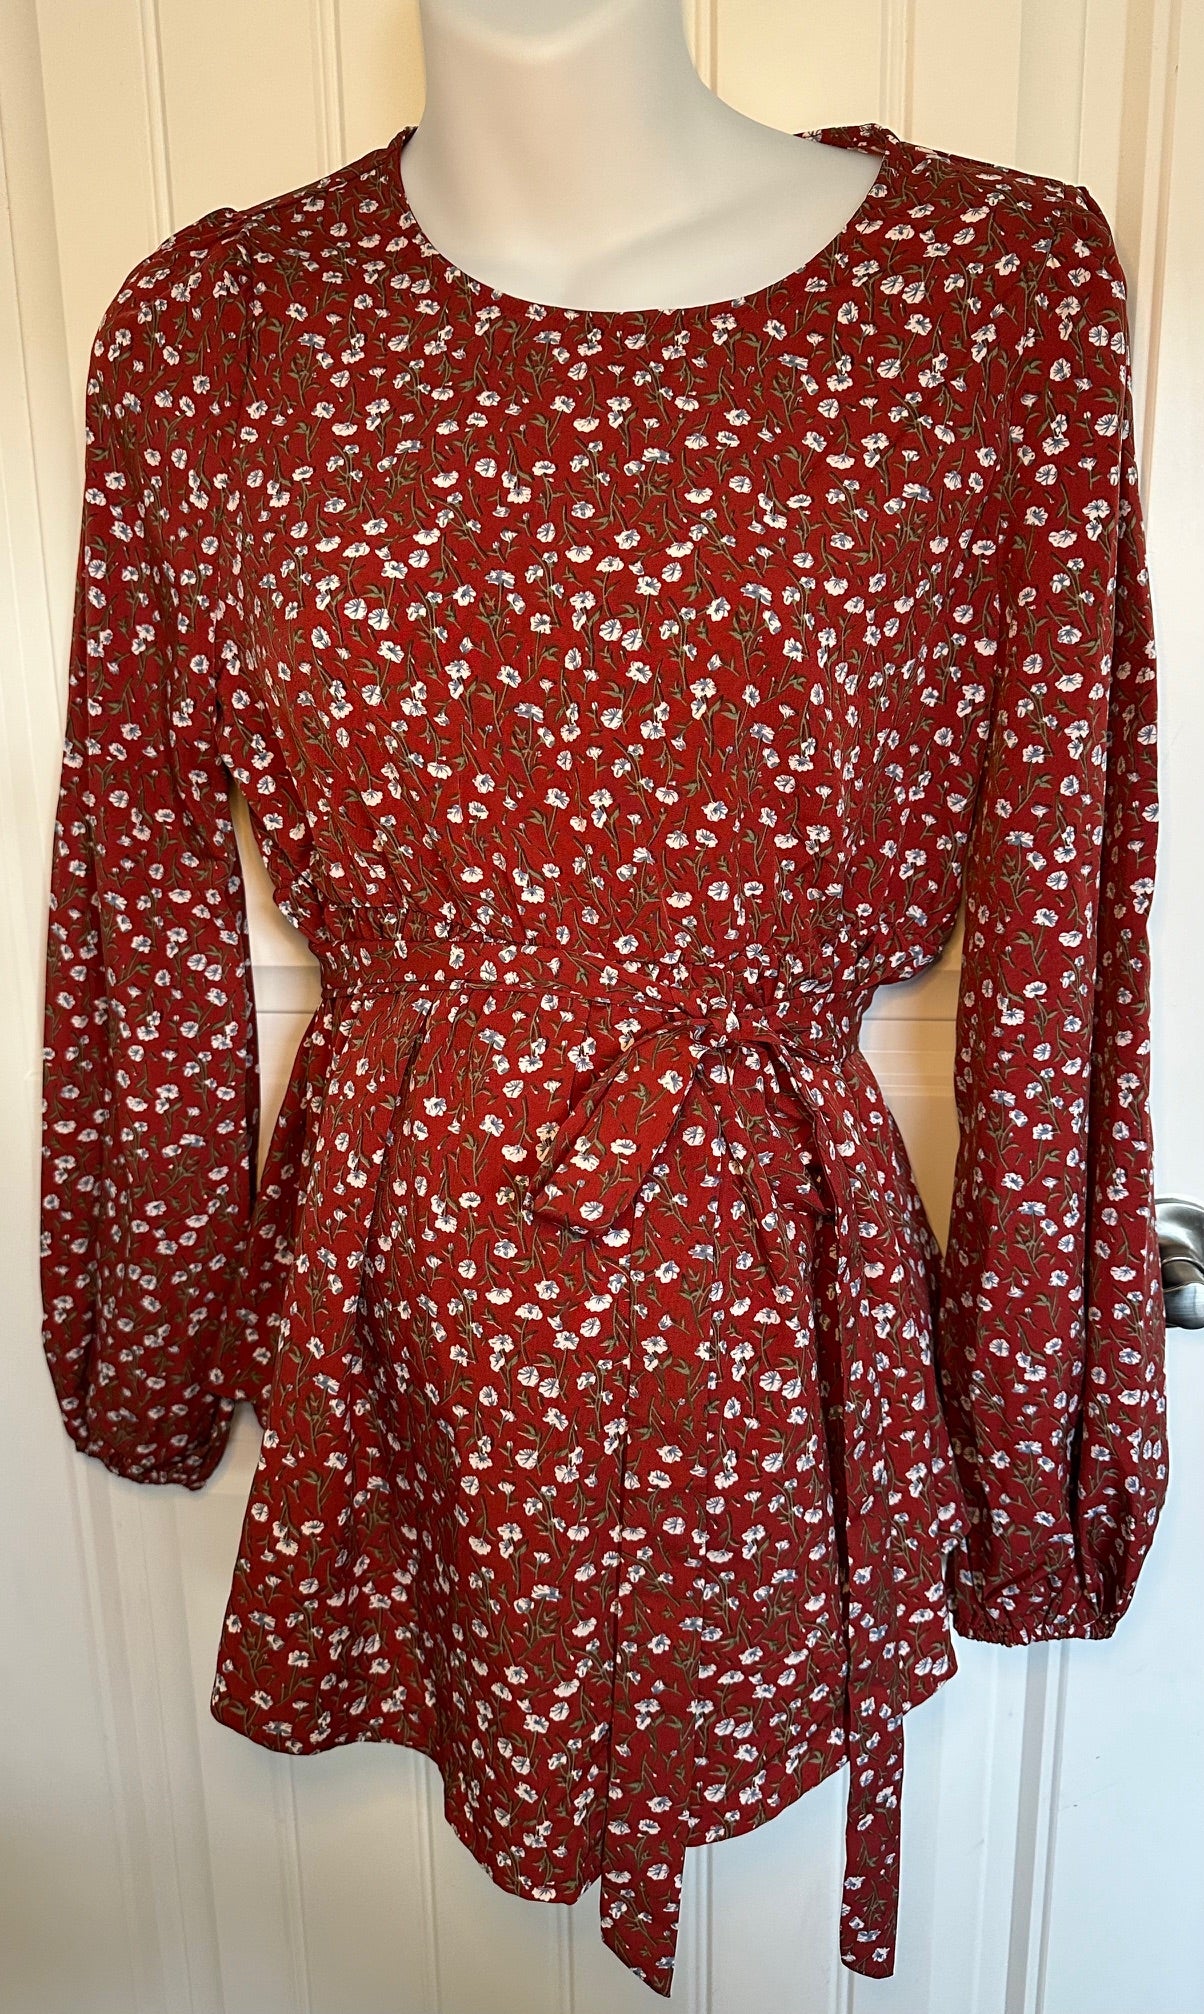 Shein, Dark Red and White Flowery Maternity Top with Belt - Size Medium